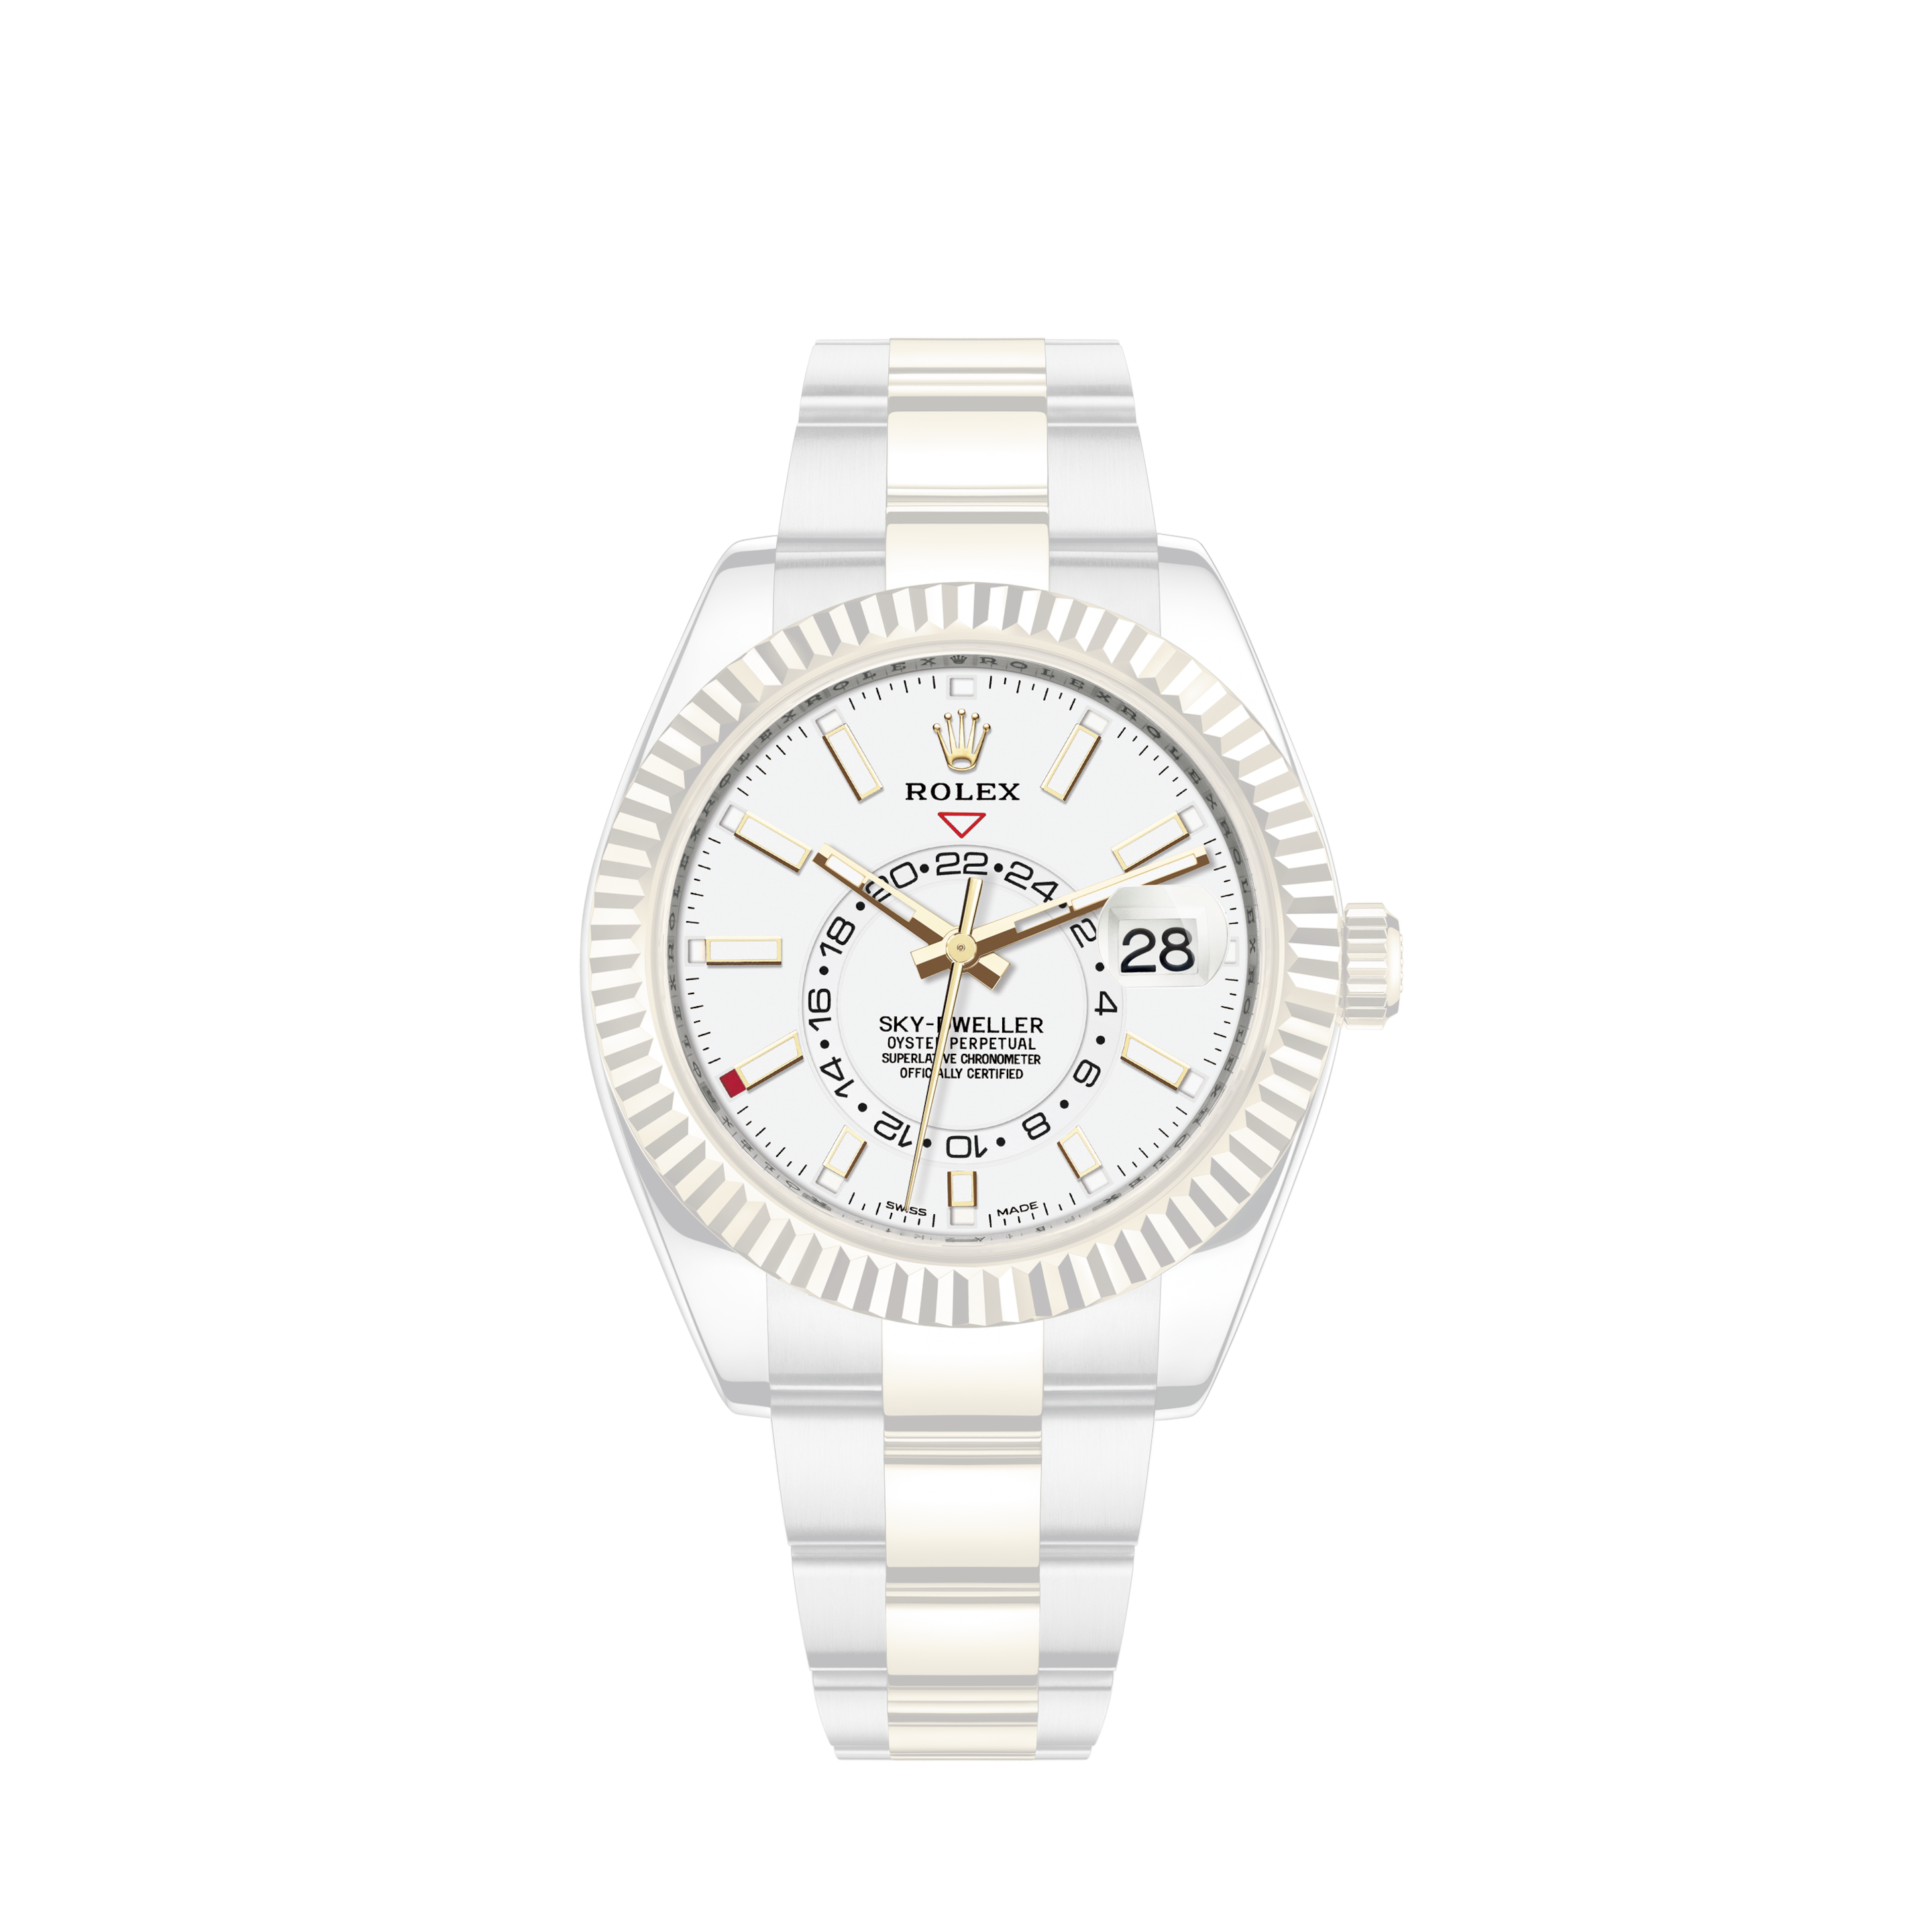 Rolex Ladies Customized Rolex watch 26mm Datejust Stainless Steel White Color Dial with Diamonds